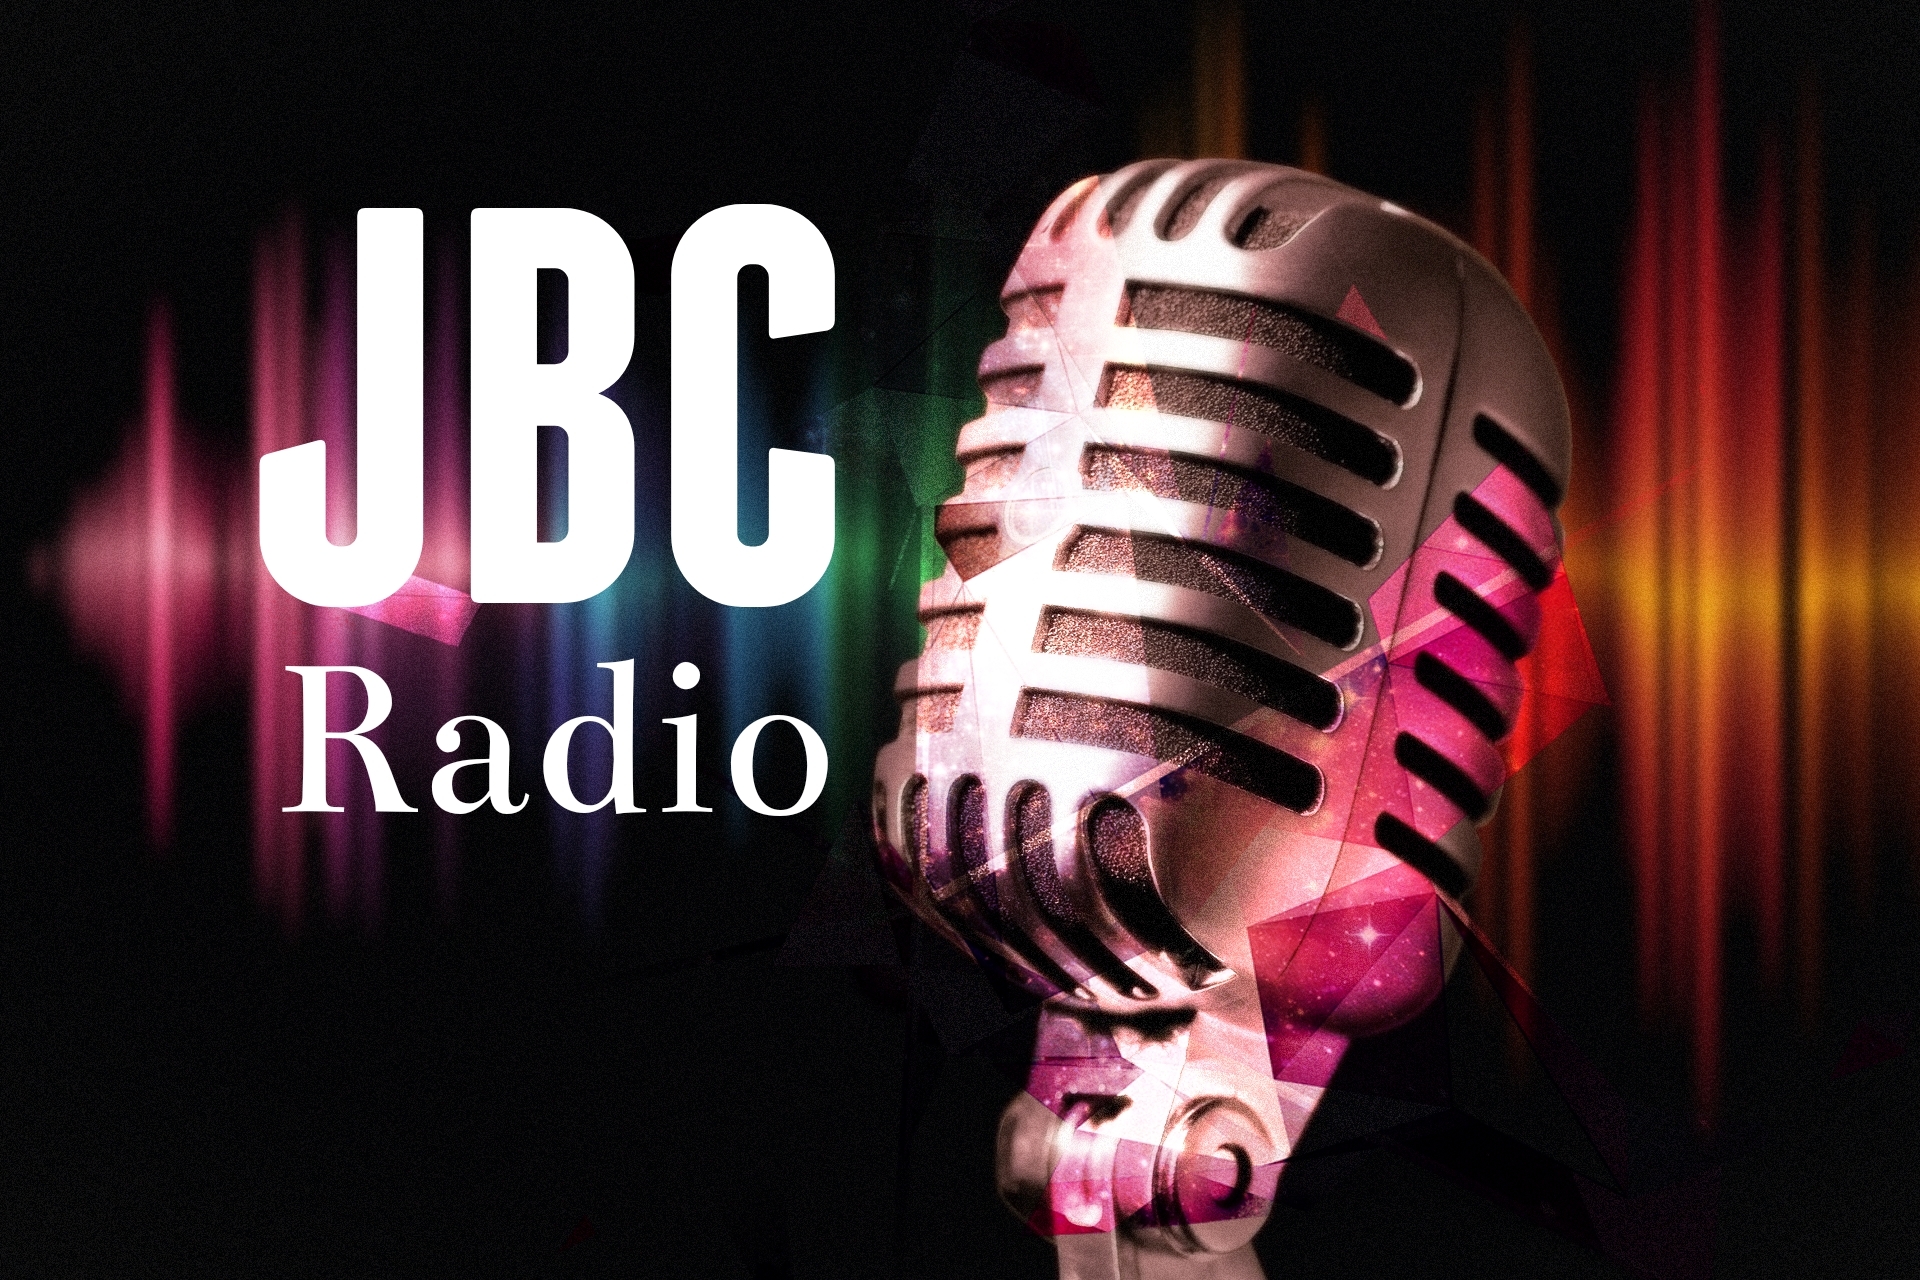 Art for JBC Radio Jacome Broadcasting Company by Angel Jacome